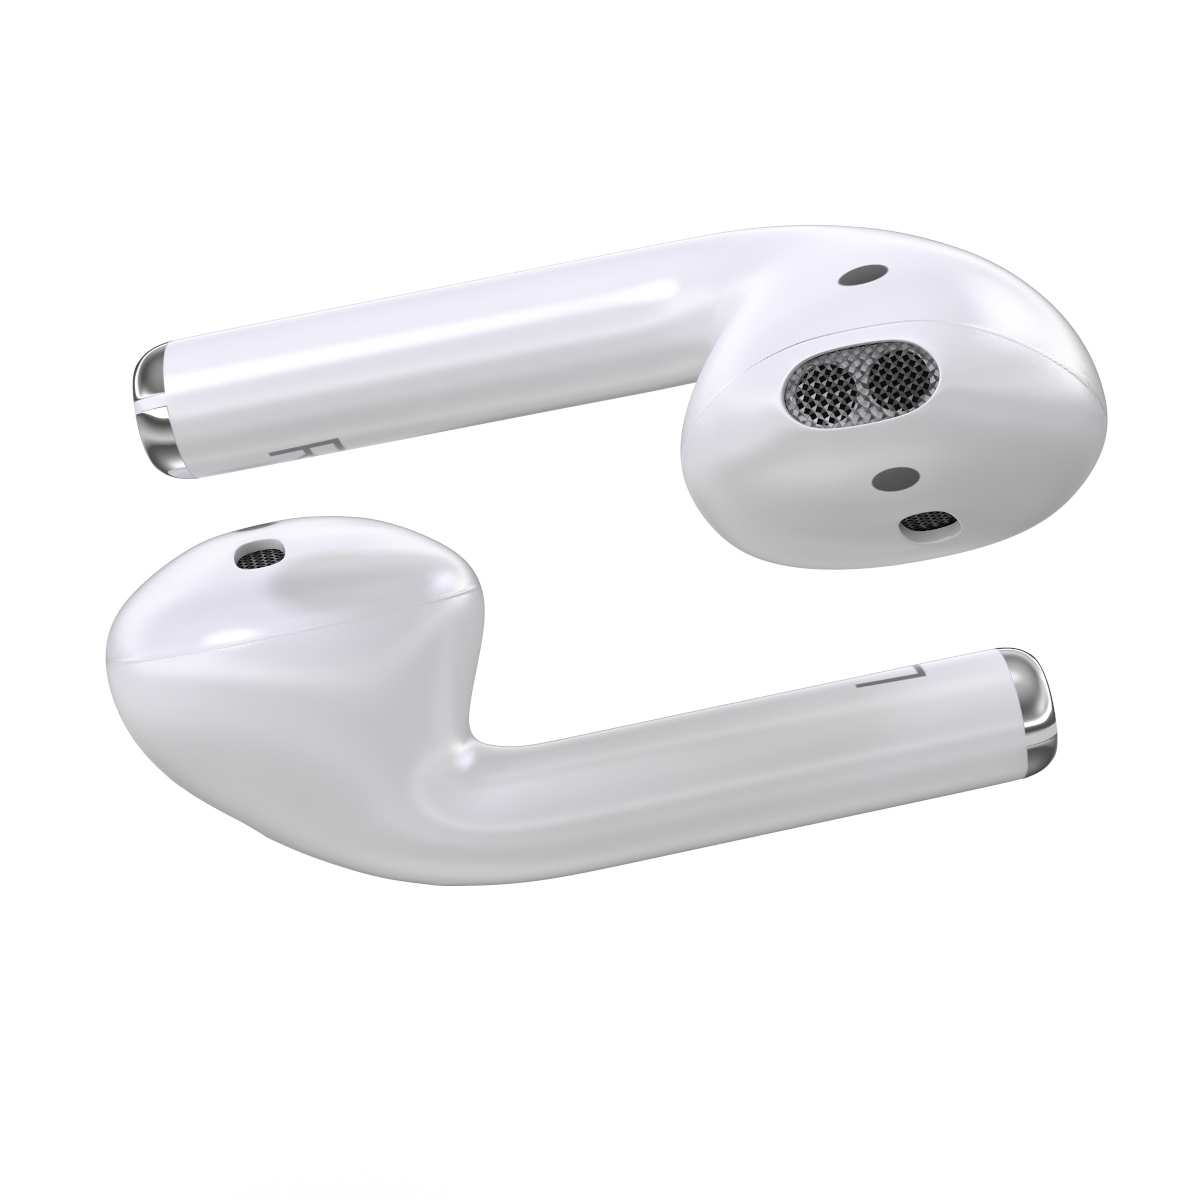 apple airpods max